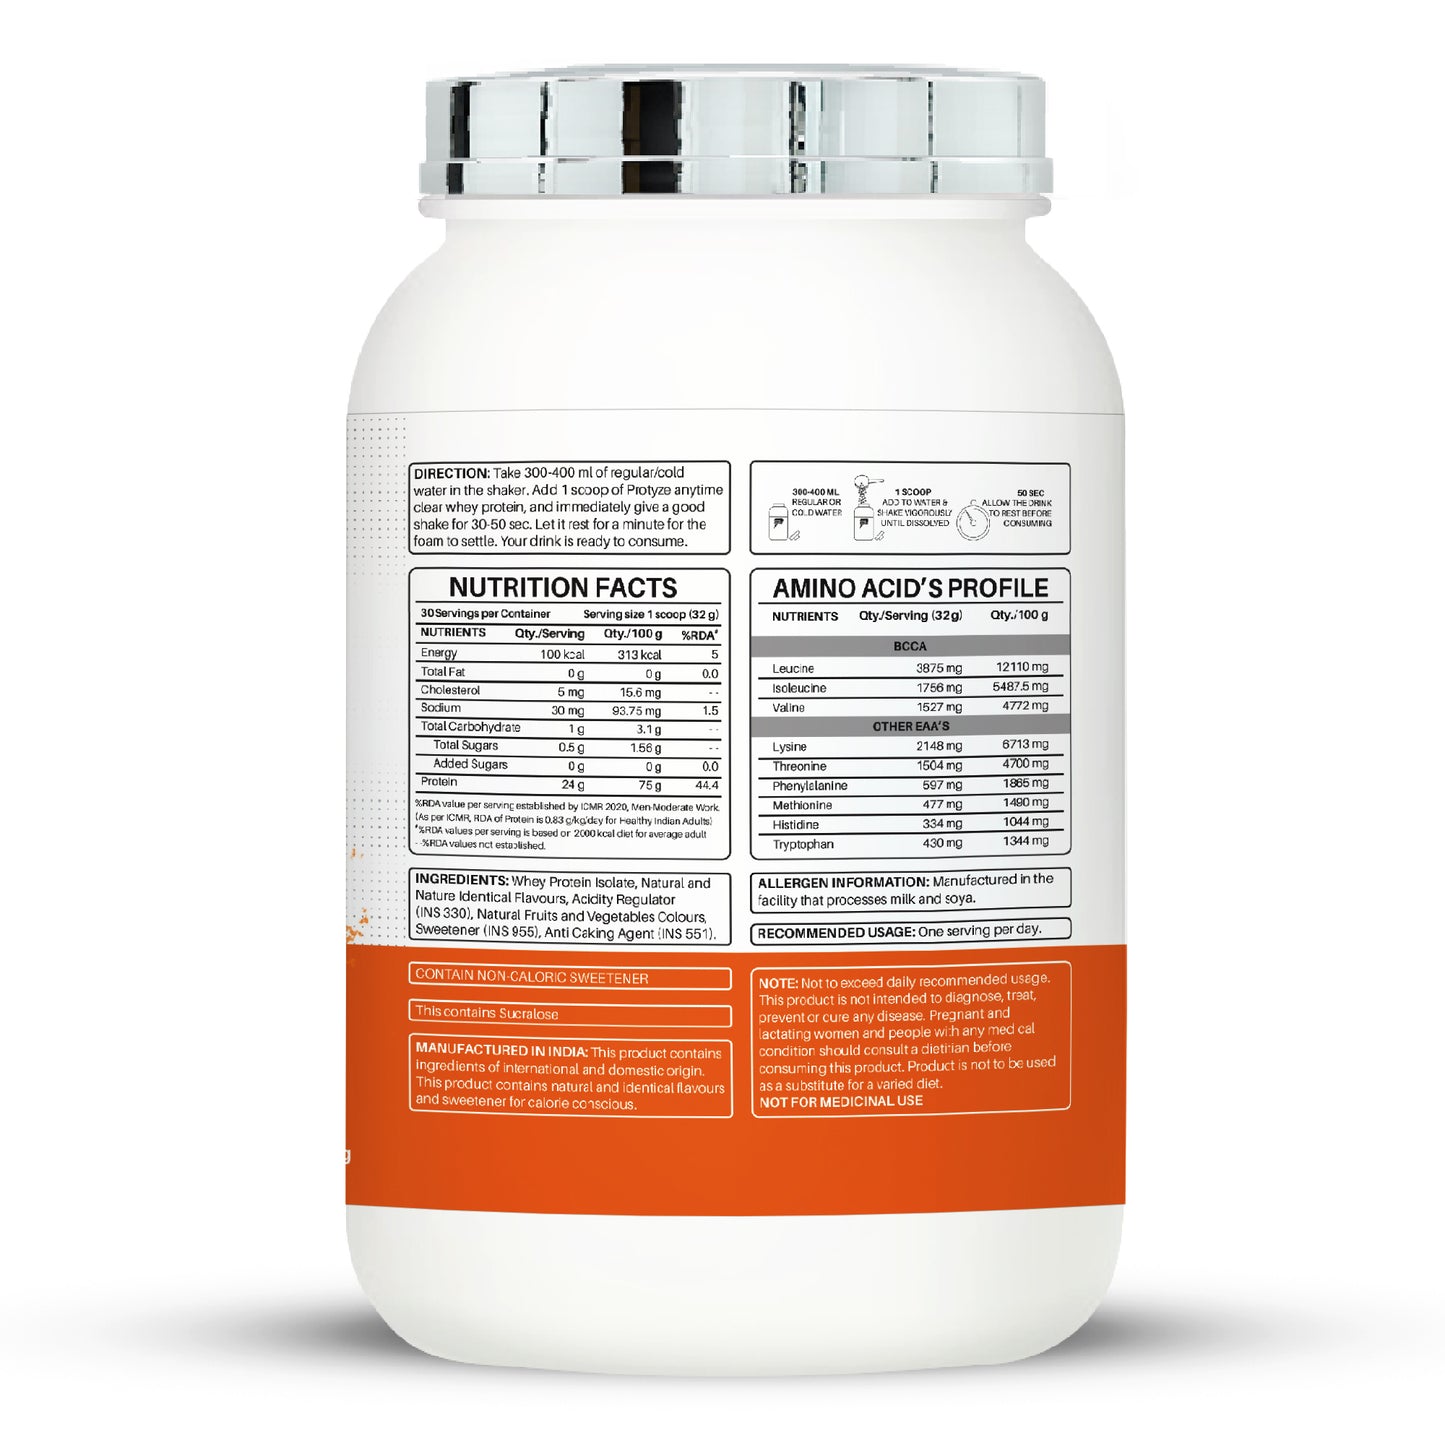 Protyze Anytime Clear Whey Isolate, Orange Squash (30 Servings)